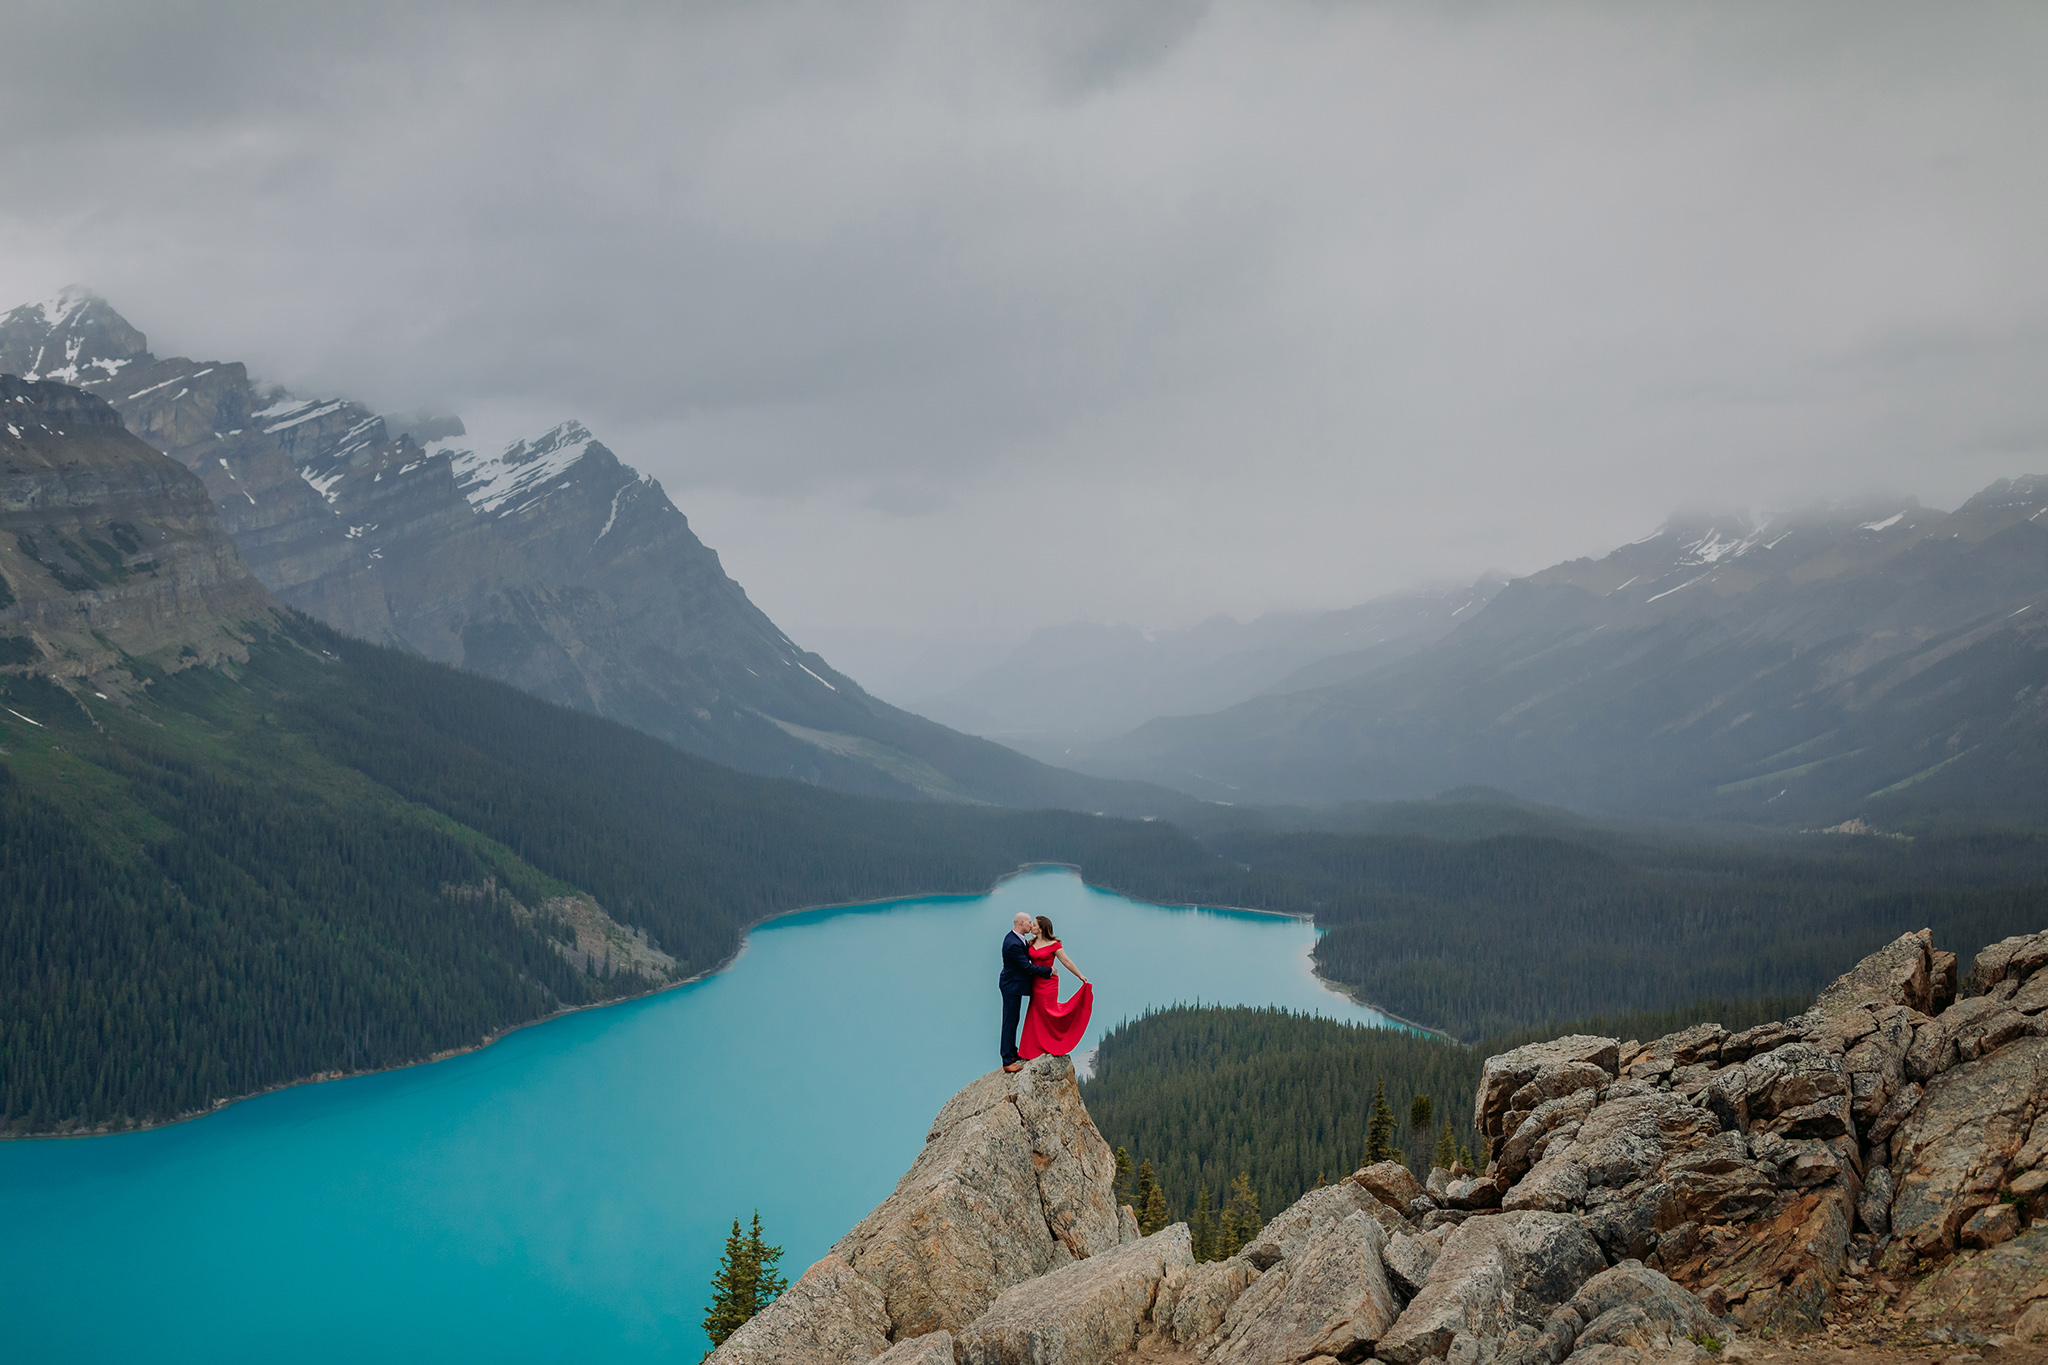 Peyto Lake adventurous Formal engagement photos on a cold rainy day in the mountains in Banff National Park. Featuring stunning red evening gown & dramatic blue lake backdrop photographed by ENV Photography